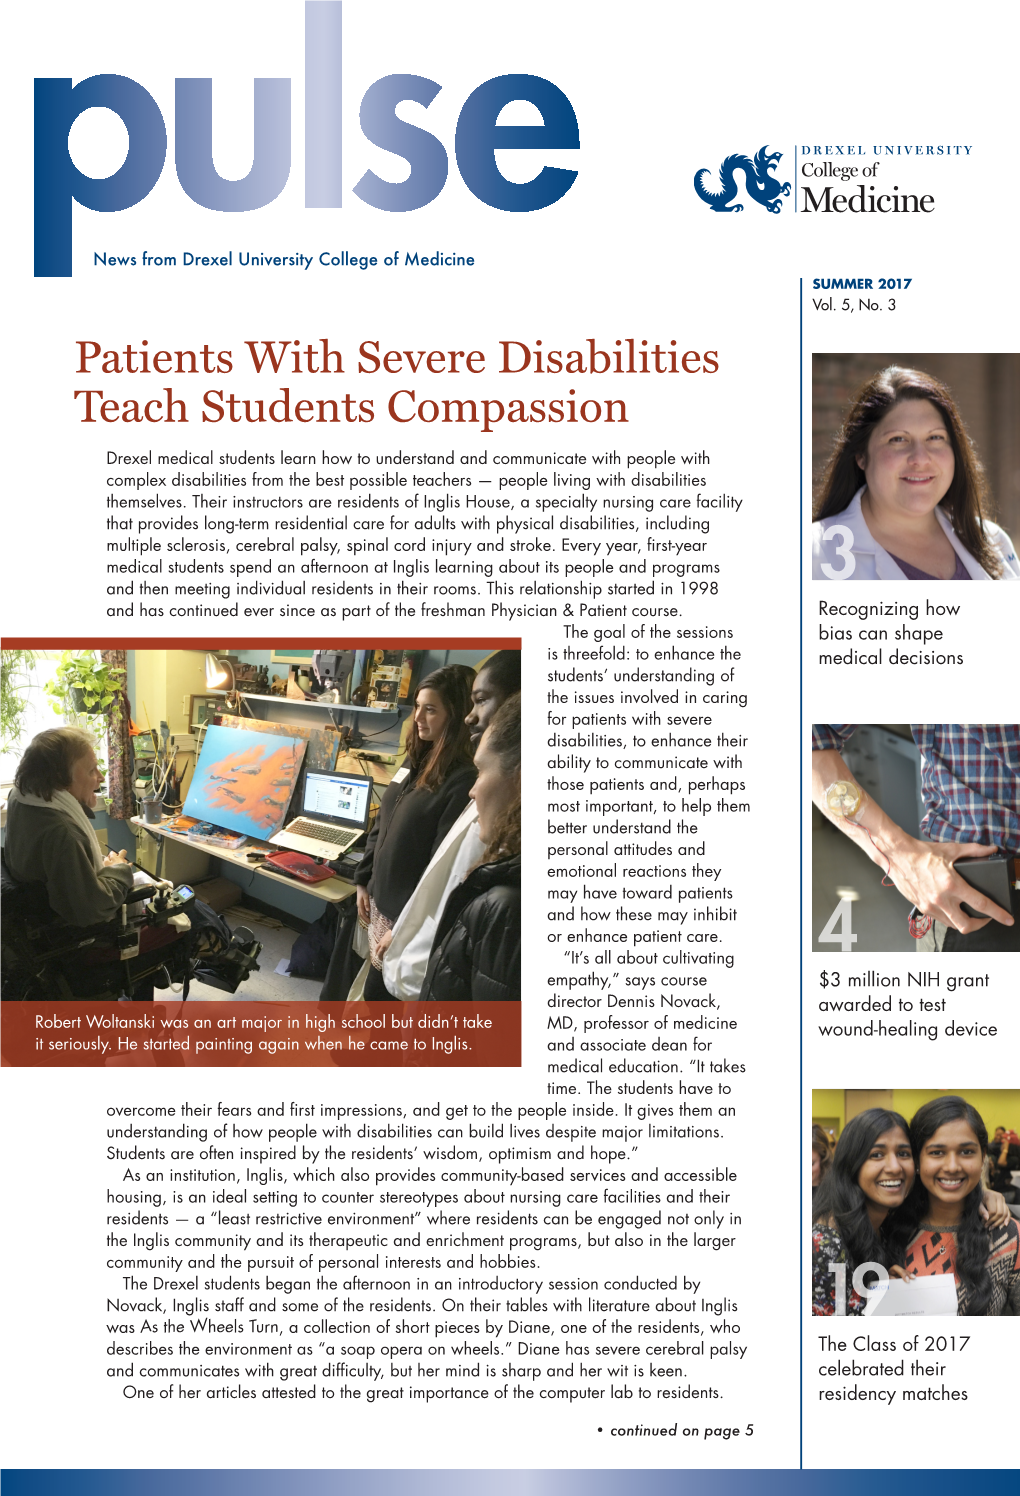 Patients with Severe Disabilities Teach Students Compassion